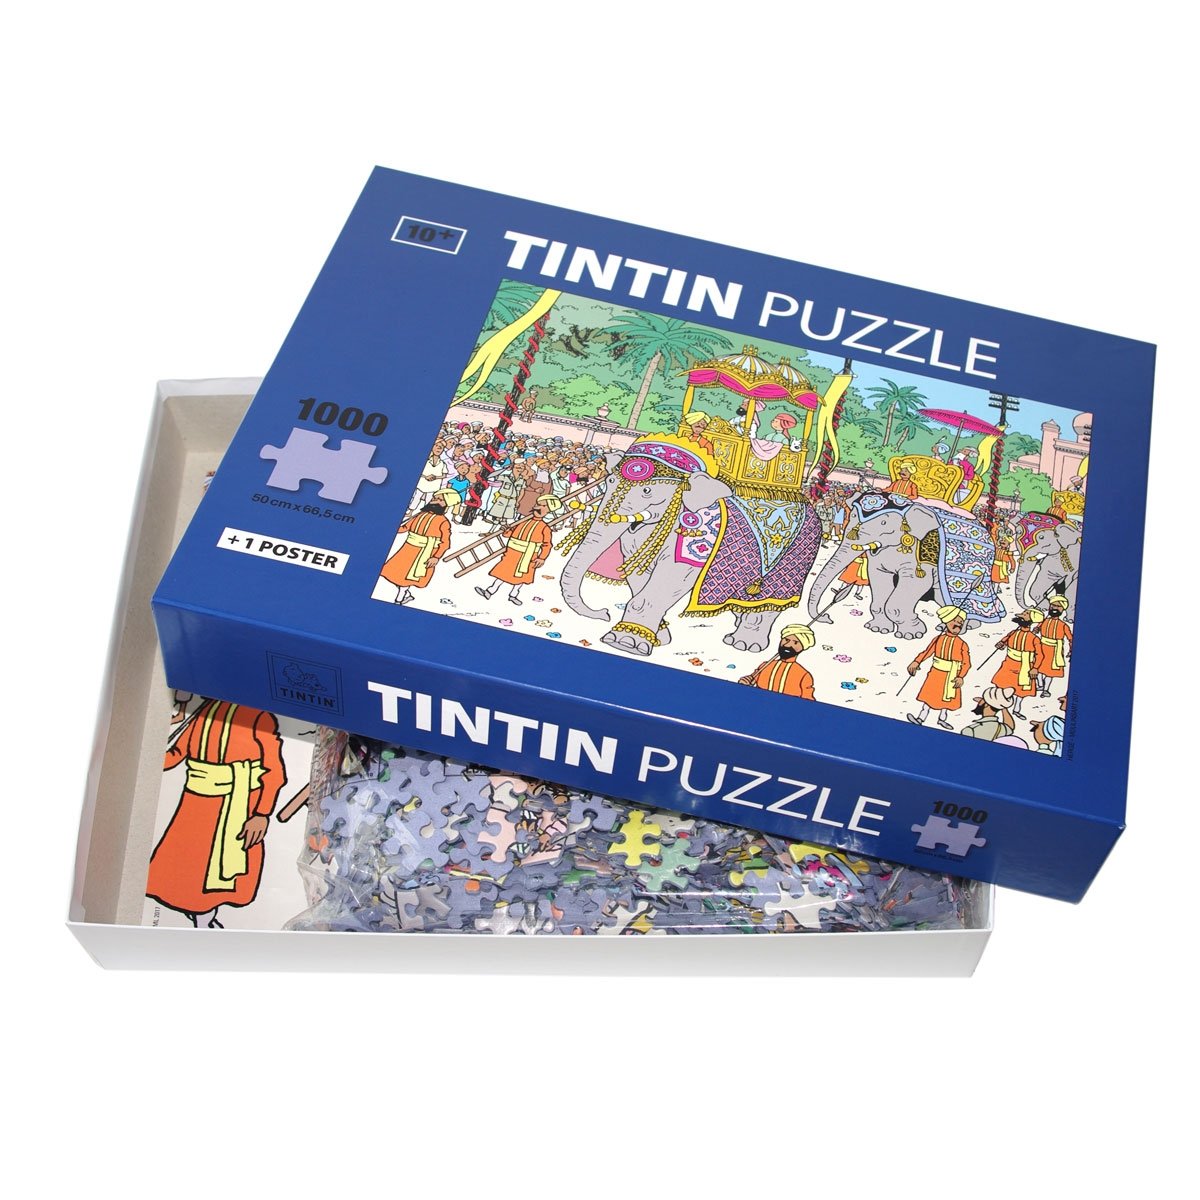 1000 pcs puzzle - Elephant Parade Puzzle and poster